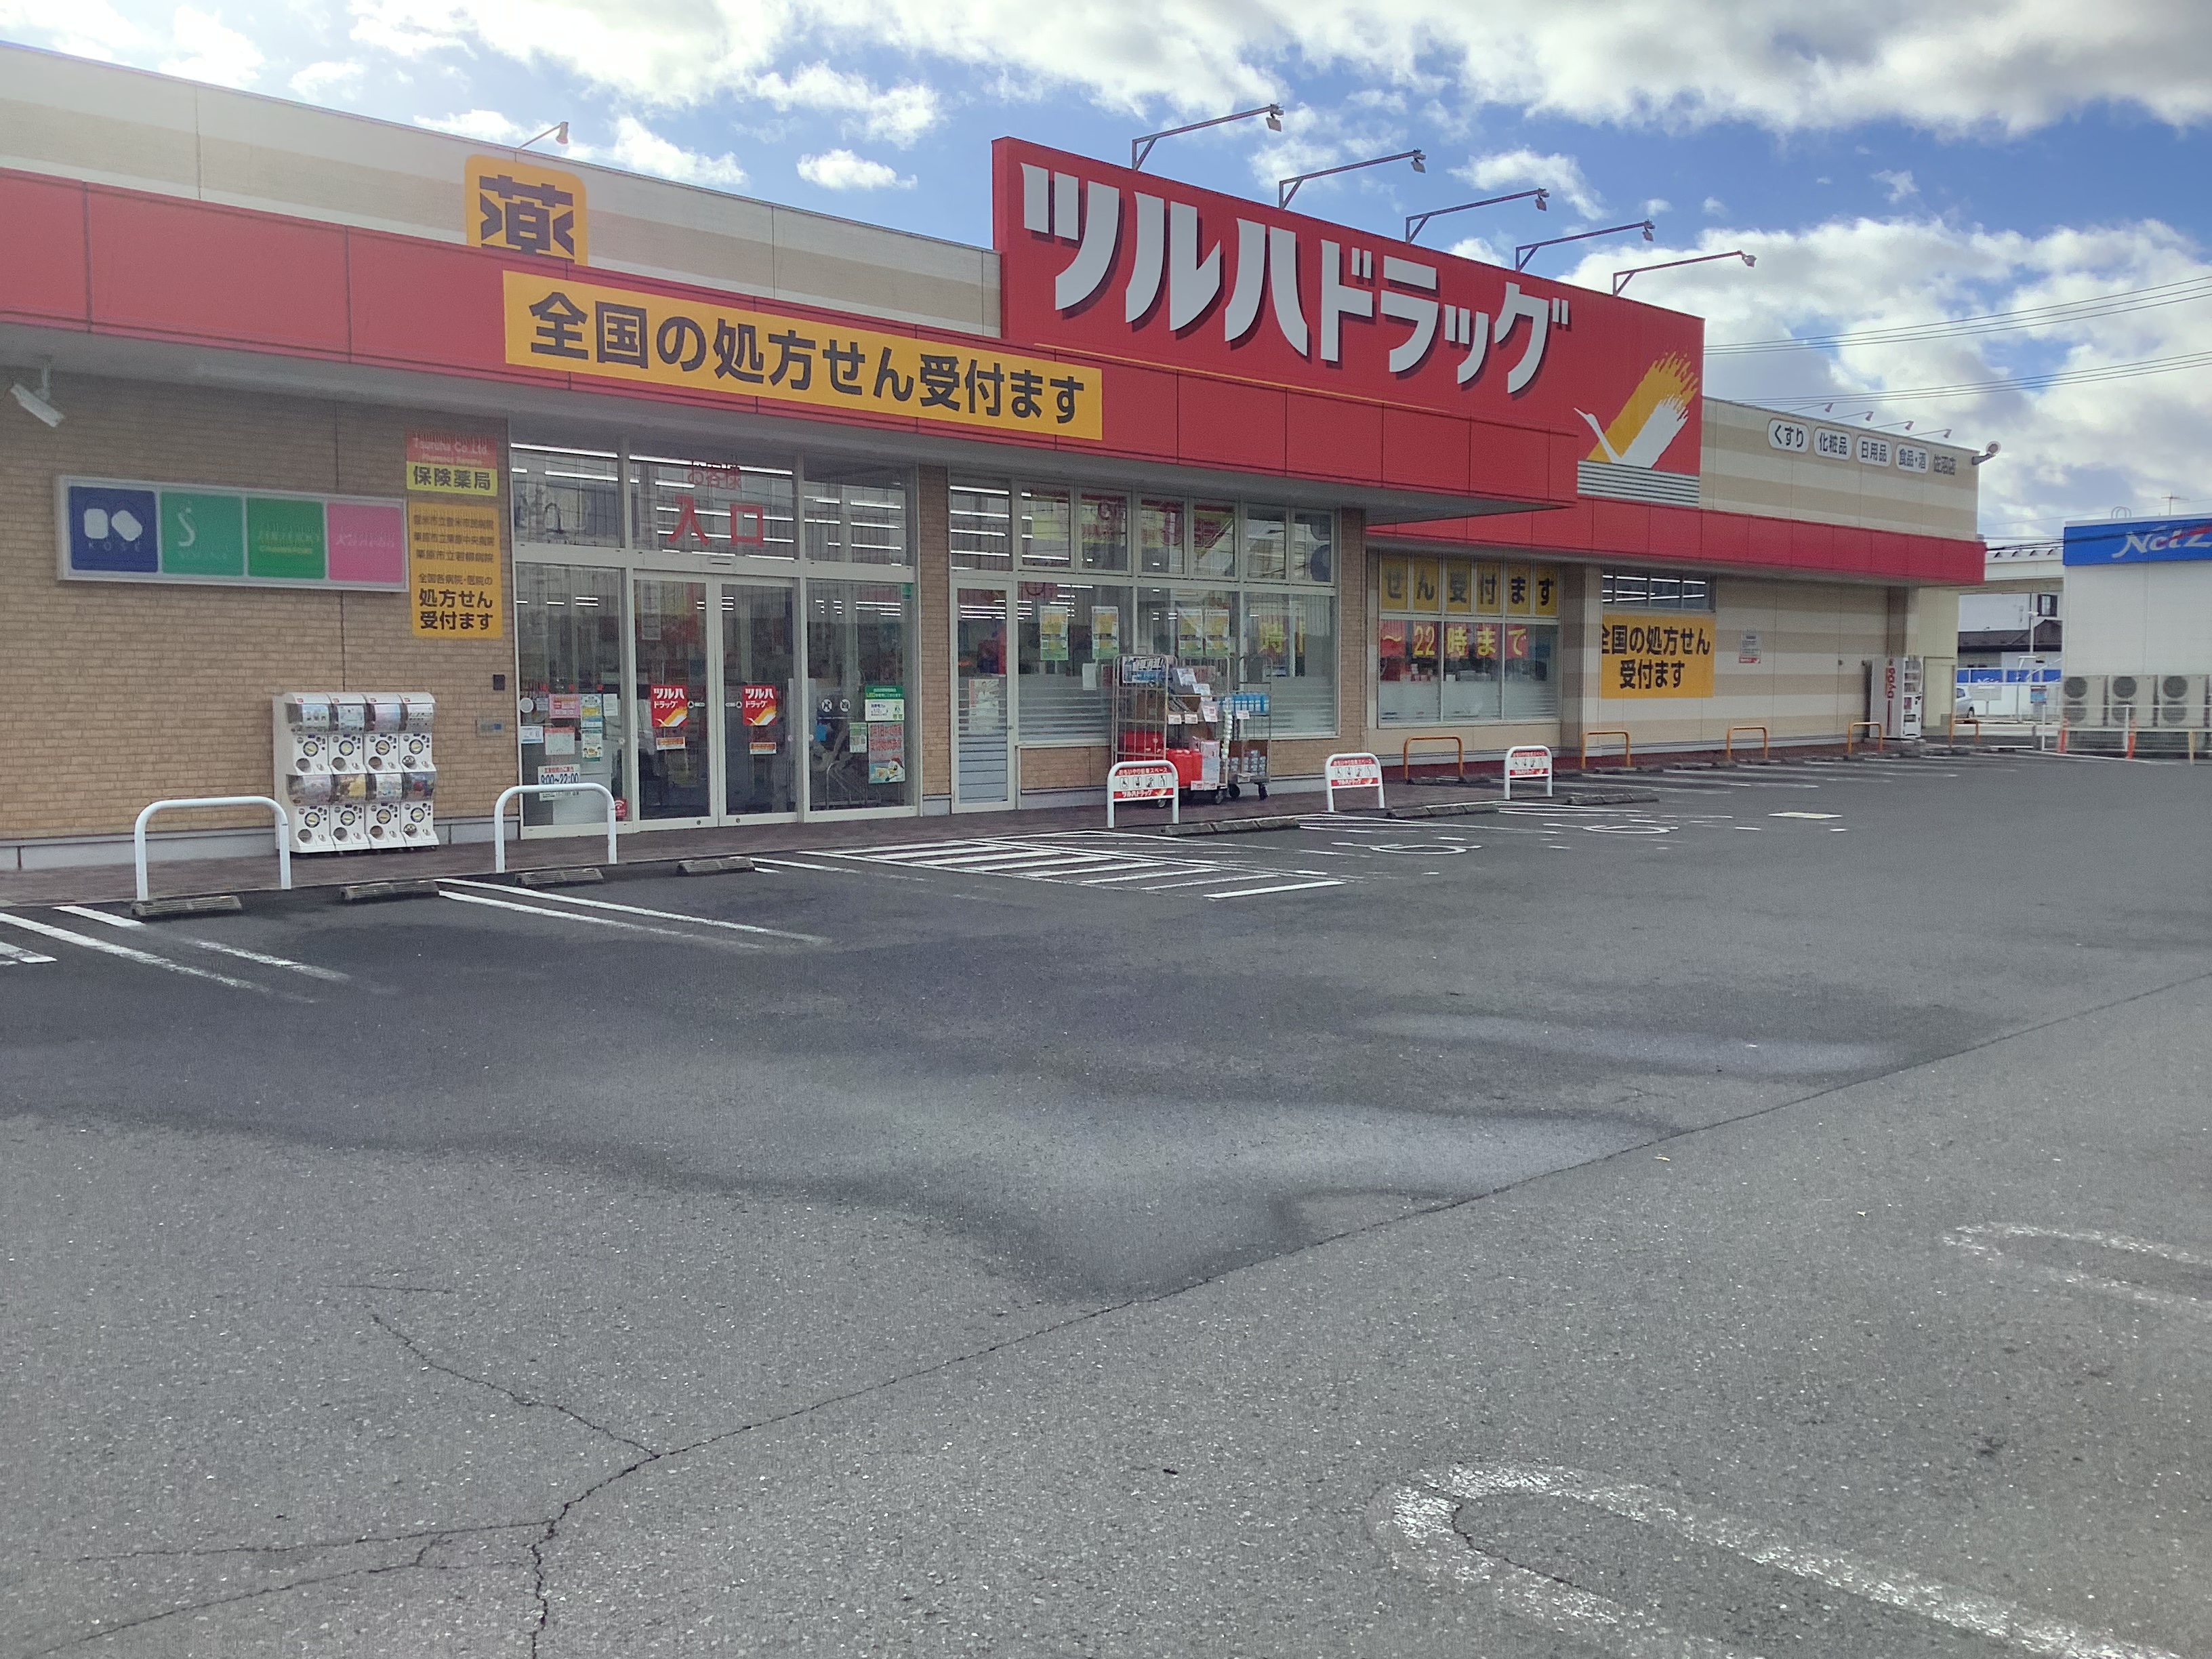 Images ツルハドラッグ 佐沼店